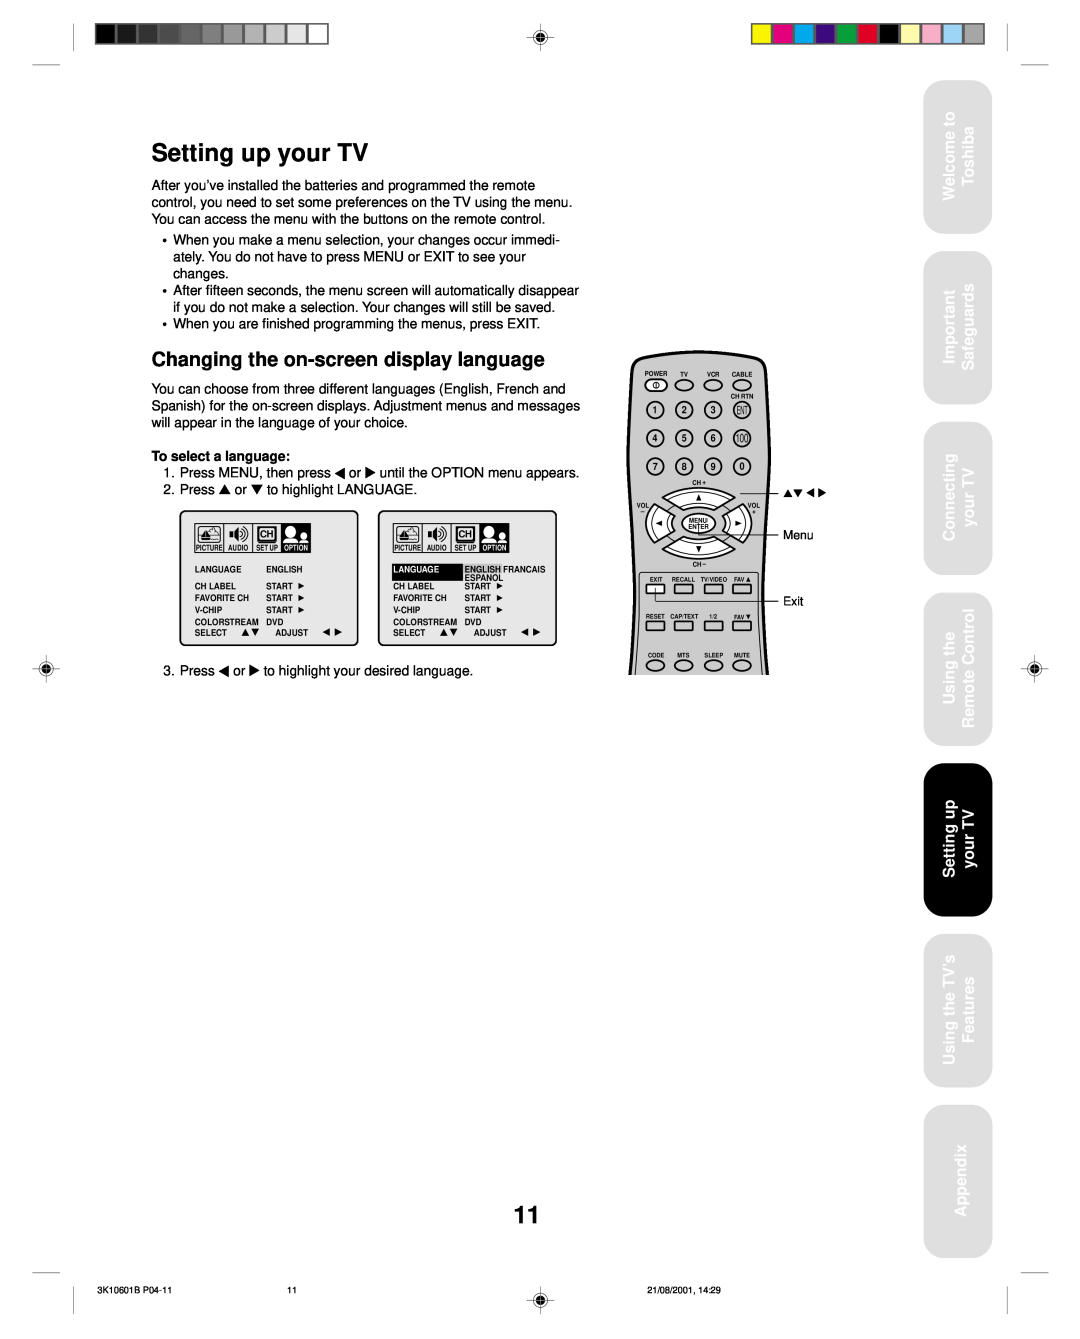 Toshiba 27A41 Setting up your TV, Changing the on-screen display language, Welcome to Toshiba, Safeguards, Appendix 